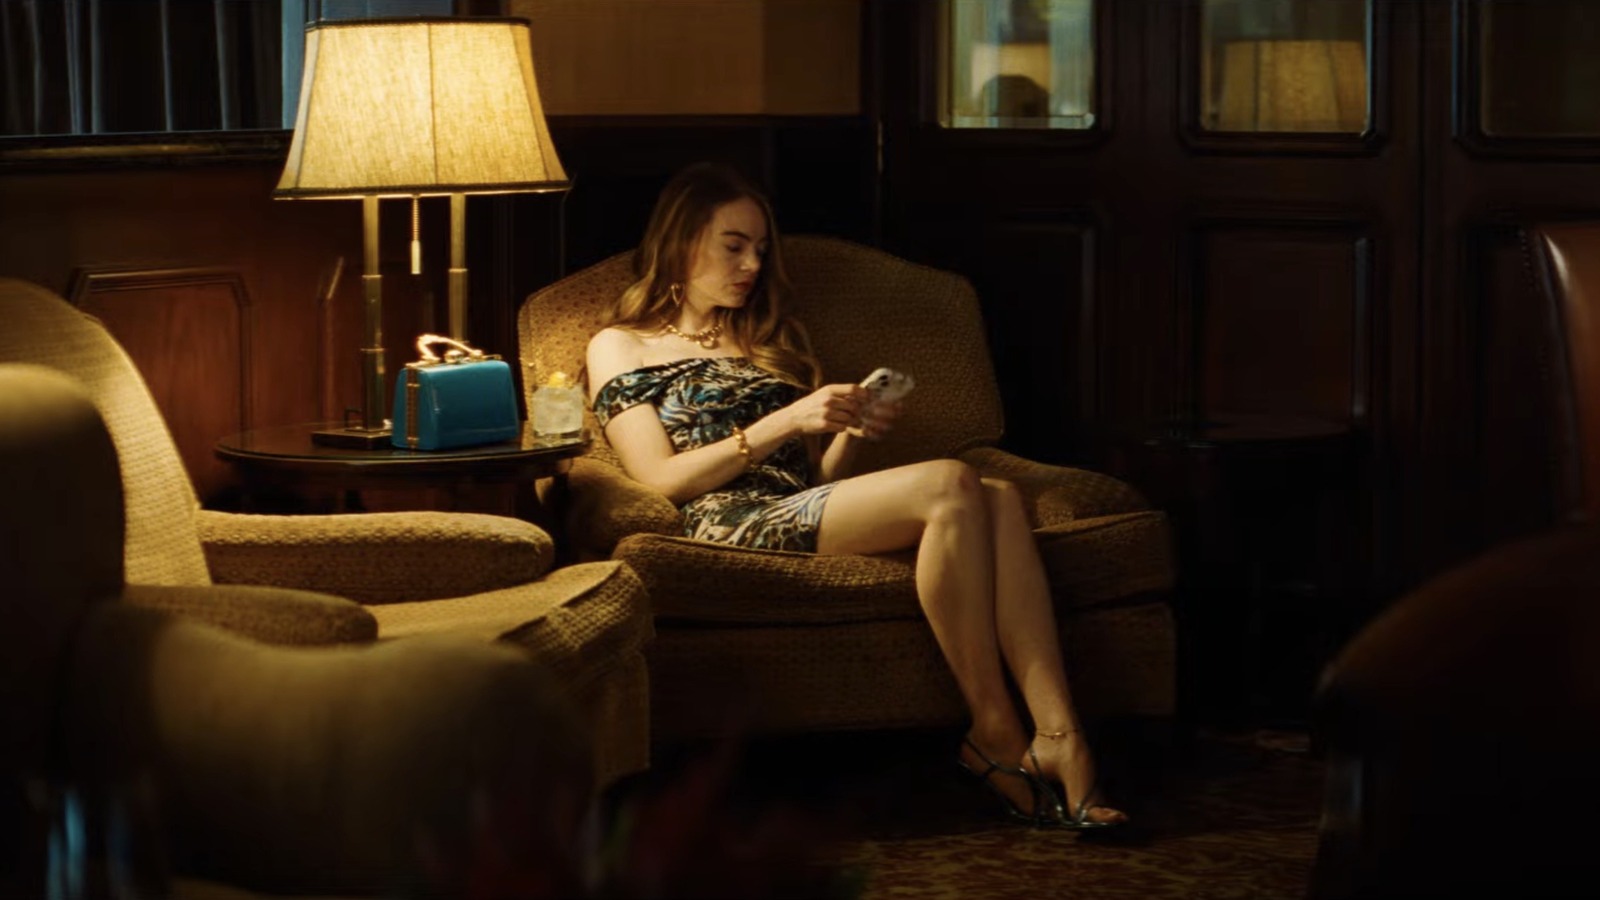 Emma Stone And Yorgos Lanthimos Reunite For More Weirdness In The
Kinds Of Kindness Trailer